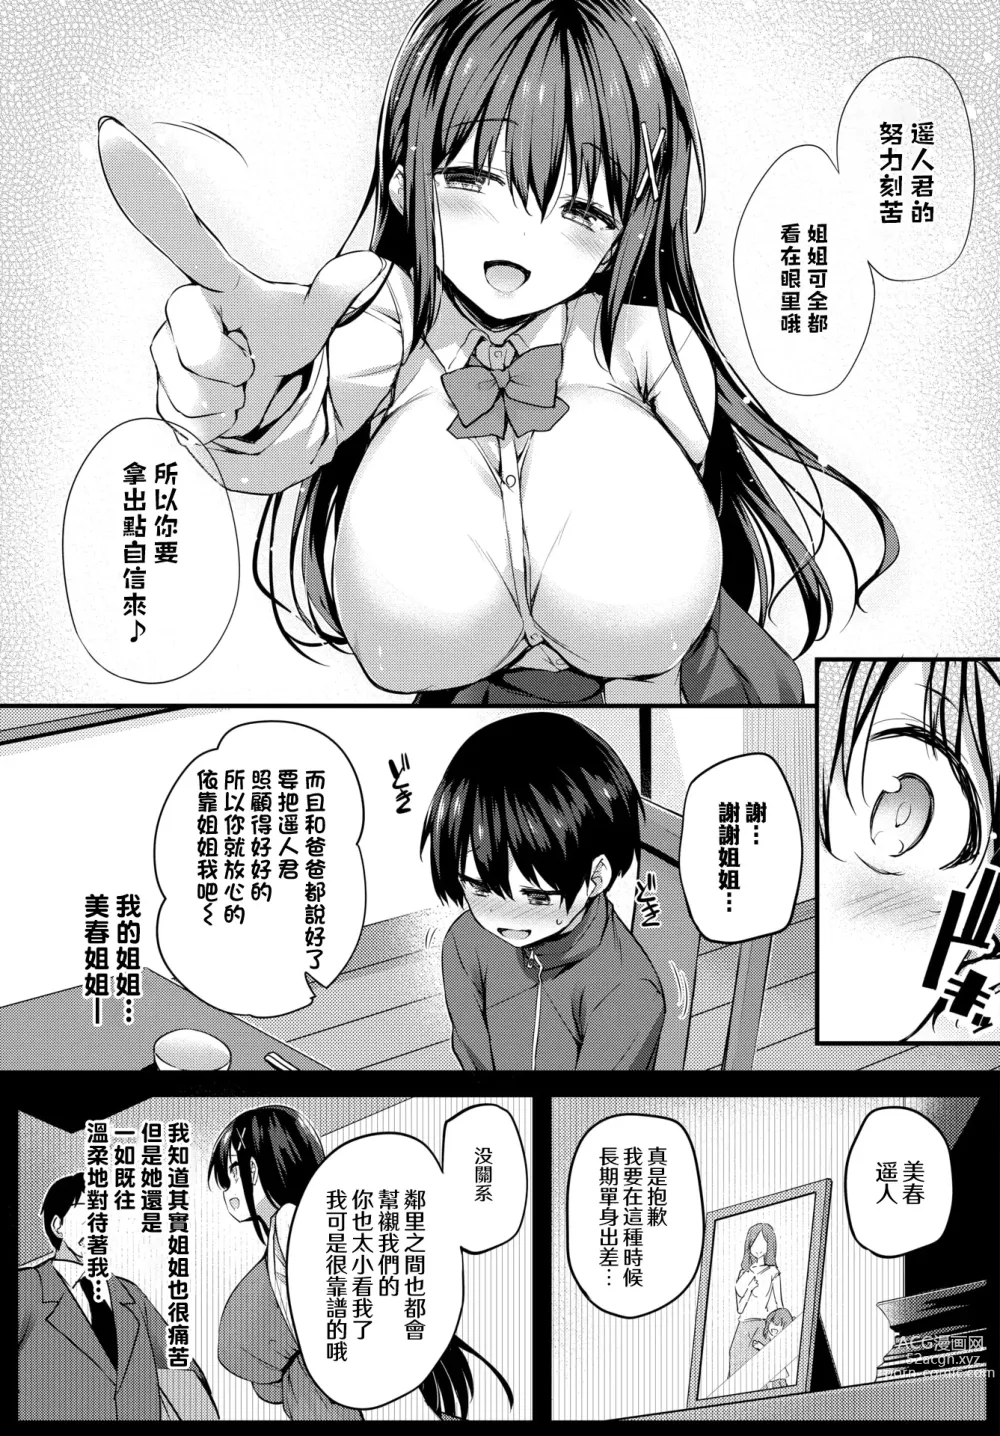 Page 3 of manga Boku no Onee-chan - My beloved was defiled and taken from me...